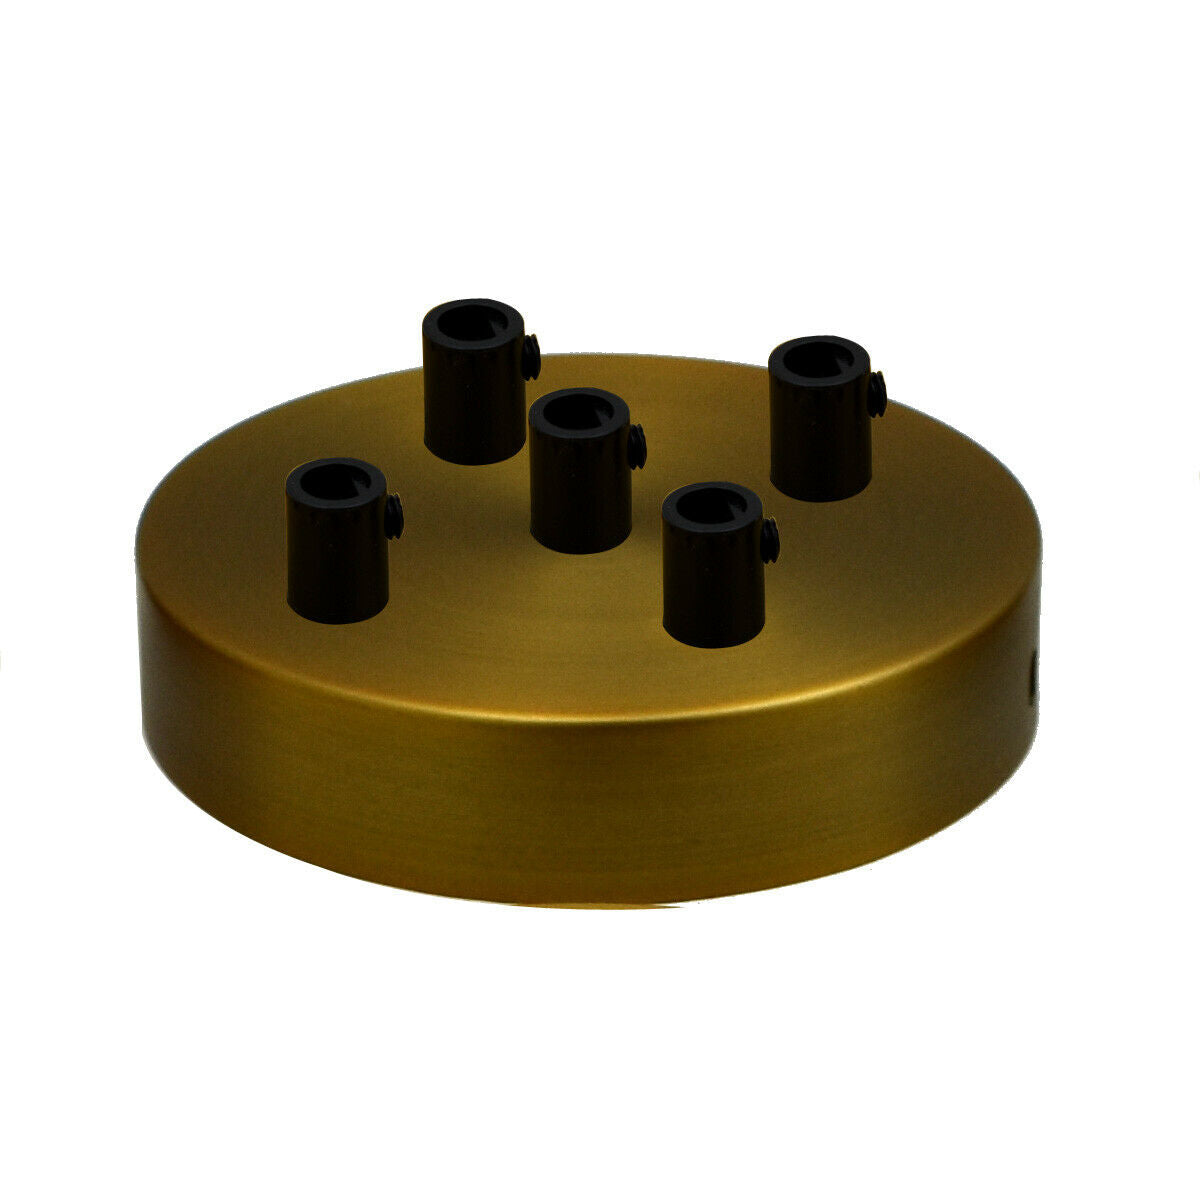 5 Outlet Yellow Brass Metal Ceiling Rose 120x25mm - Shop for LED lights - Transformers - Lampshades - Holders | LEDSone UK